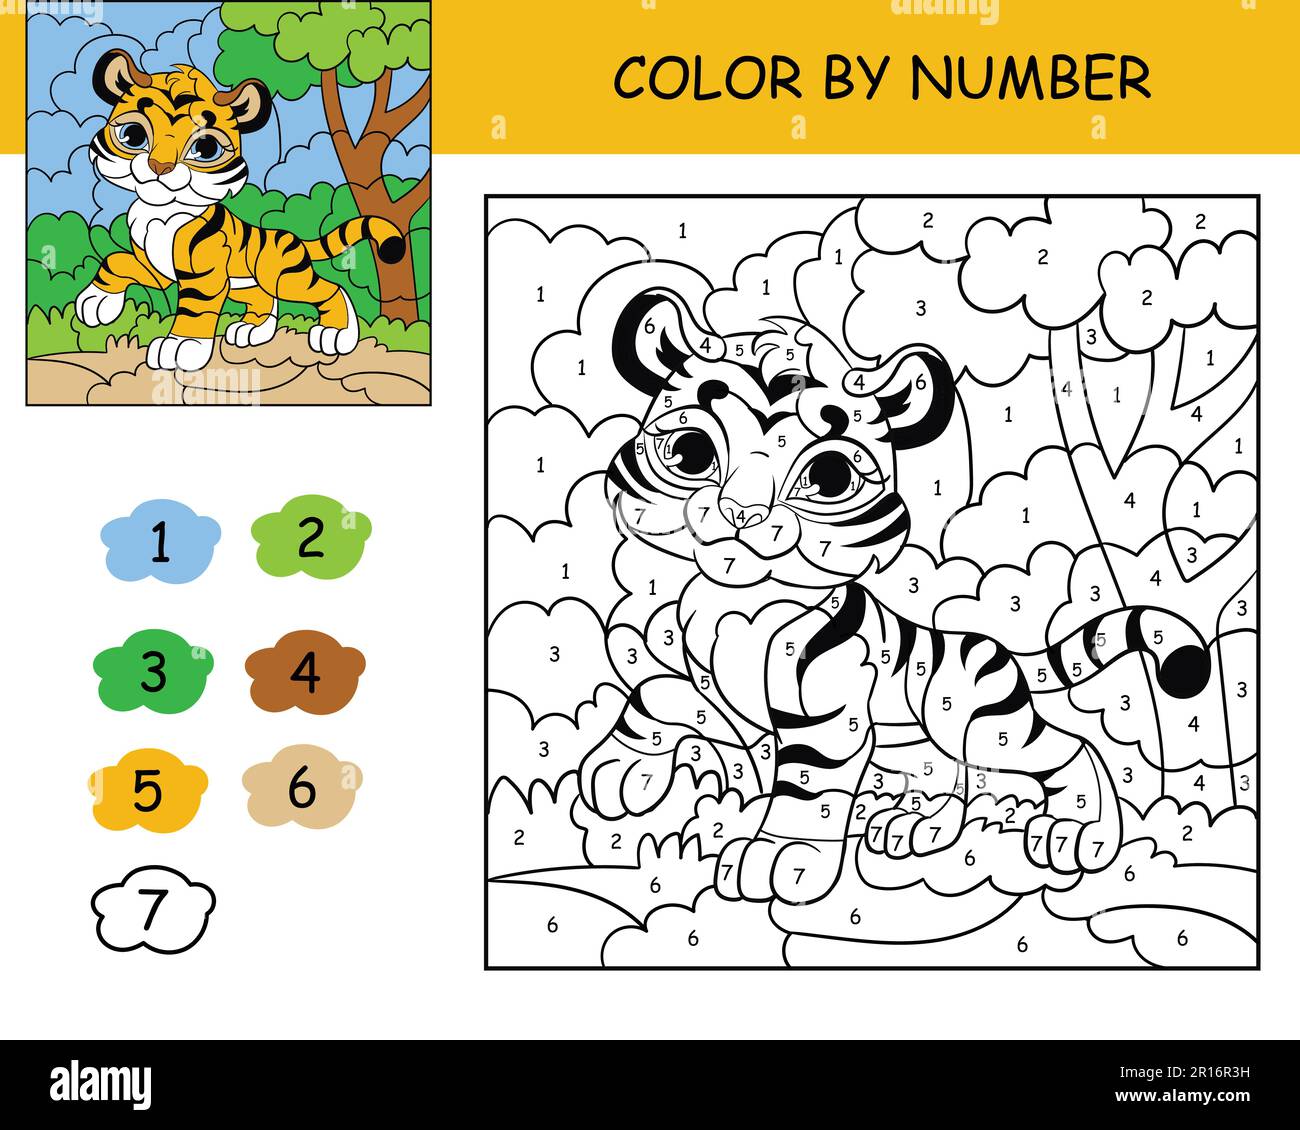 Coloring puzzle with number of color for kids with cute tiger printable coloring book worksheet for kids leisure black and white picture with color stock vector image art